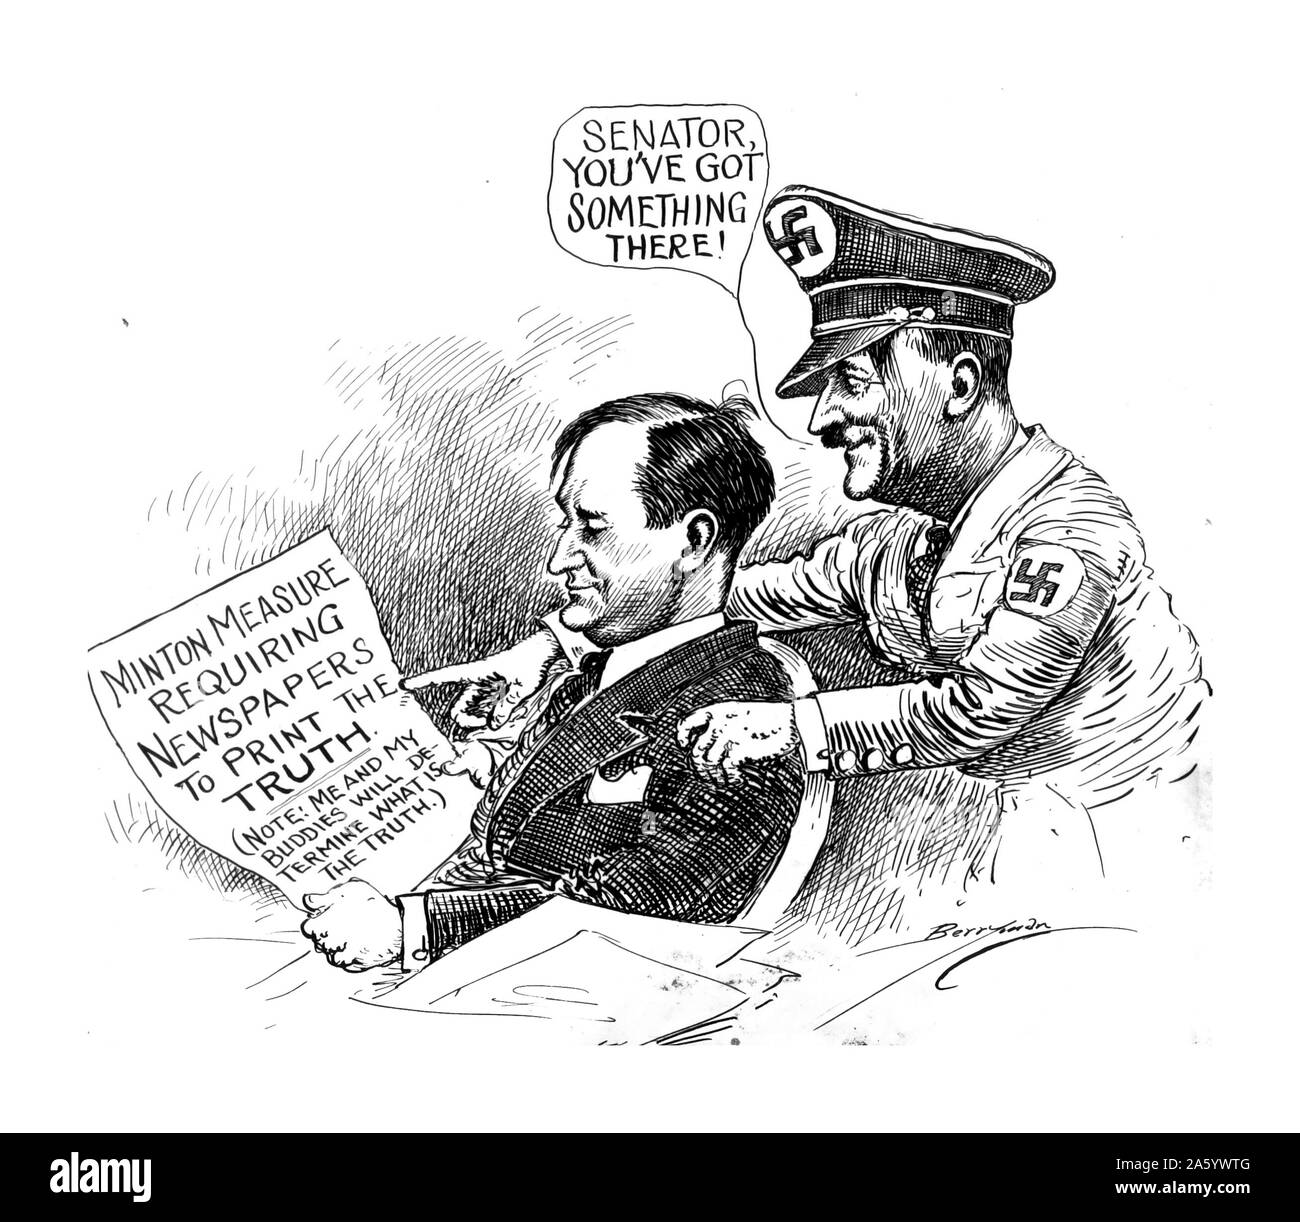 Political satire from the Berryman Political Cartoon Collection, depicting Adolf Hitler (1889-1945) Austrian-born German politician who was the leader of the Nazi Party and Chancellor of Germany, and Senator Sherman Minton (1890-1965) Democratic United States Senator from Indiana and an Associate Justice of the Supreme Court of the United States. By Clifford K. Berryman (1869-1949) Pulitzer Prize–winning cartoonist with the Washington Star newspaper. Dated 1943 Stock Photo